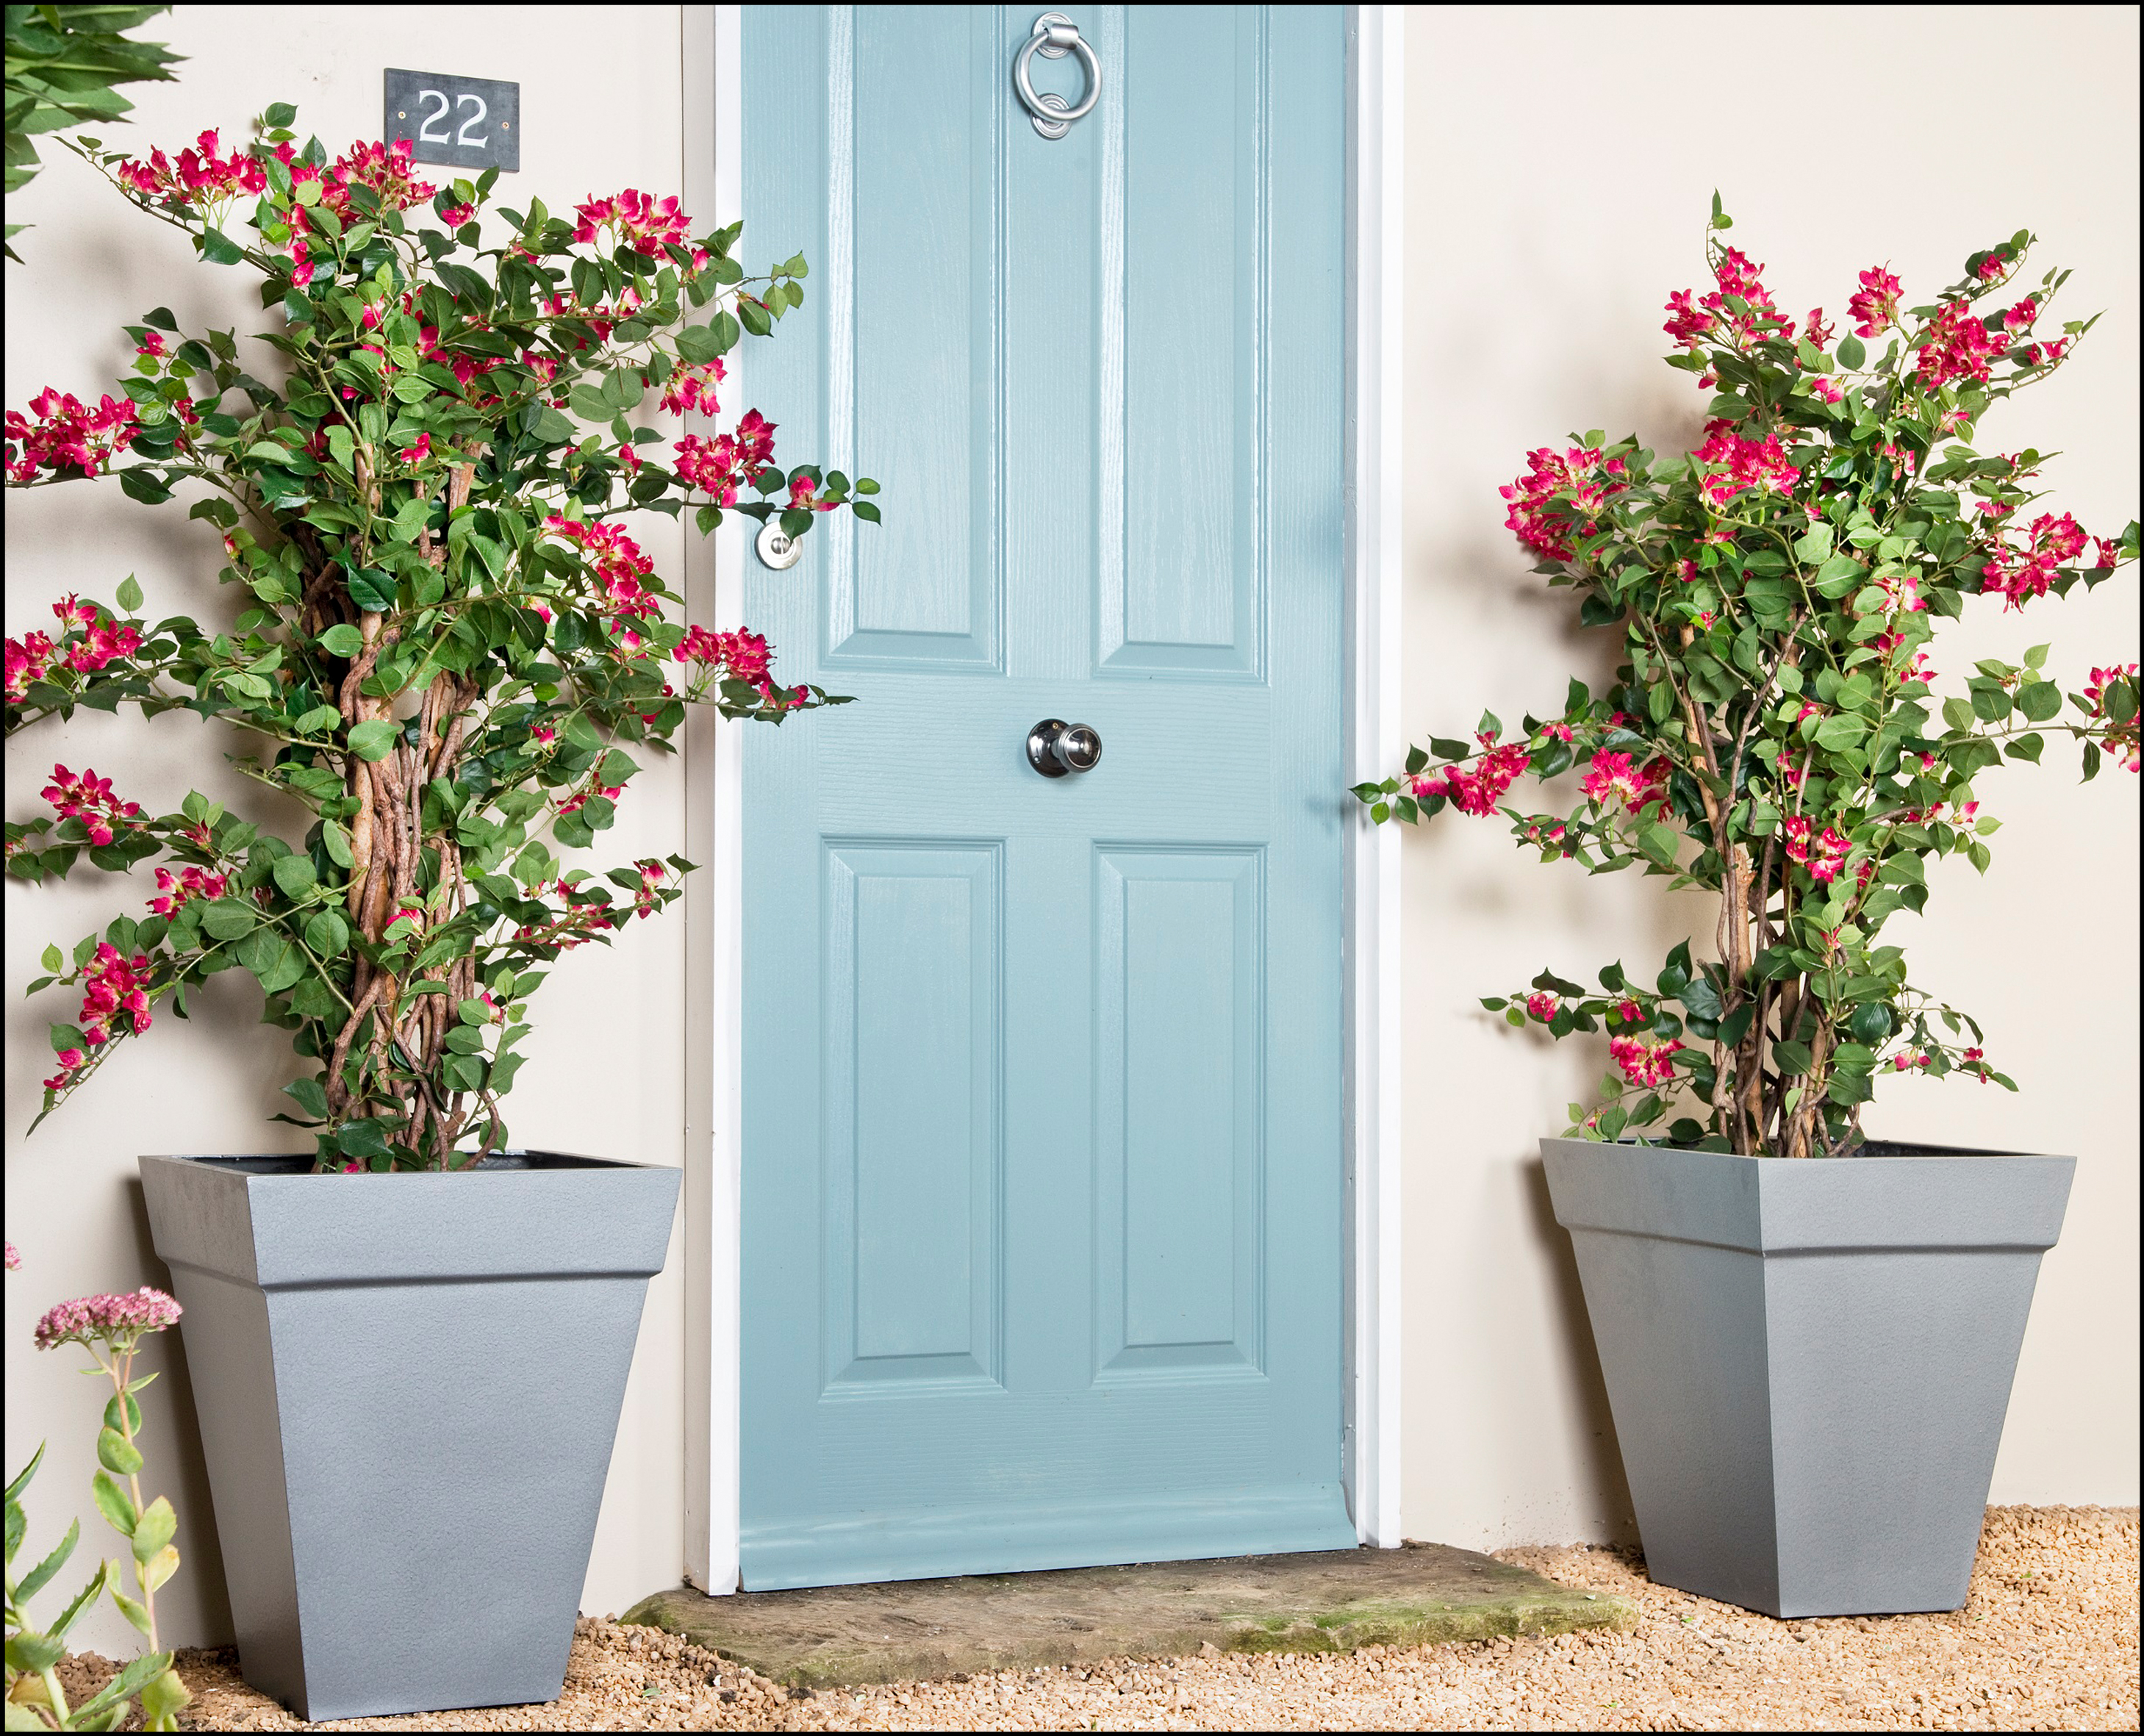 Fibreglass GEO Classic planters by Capital Garden Products